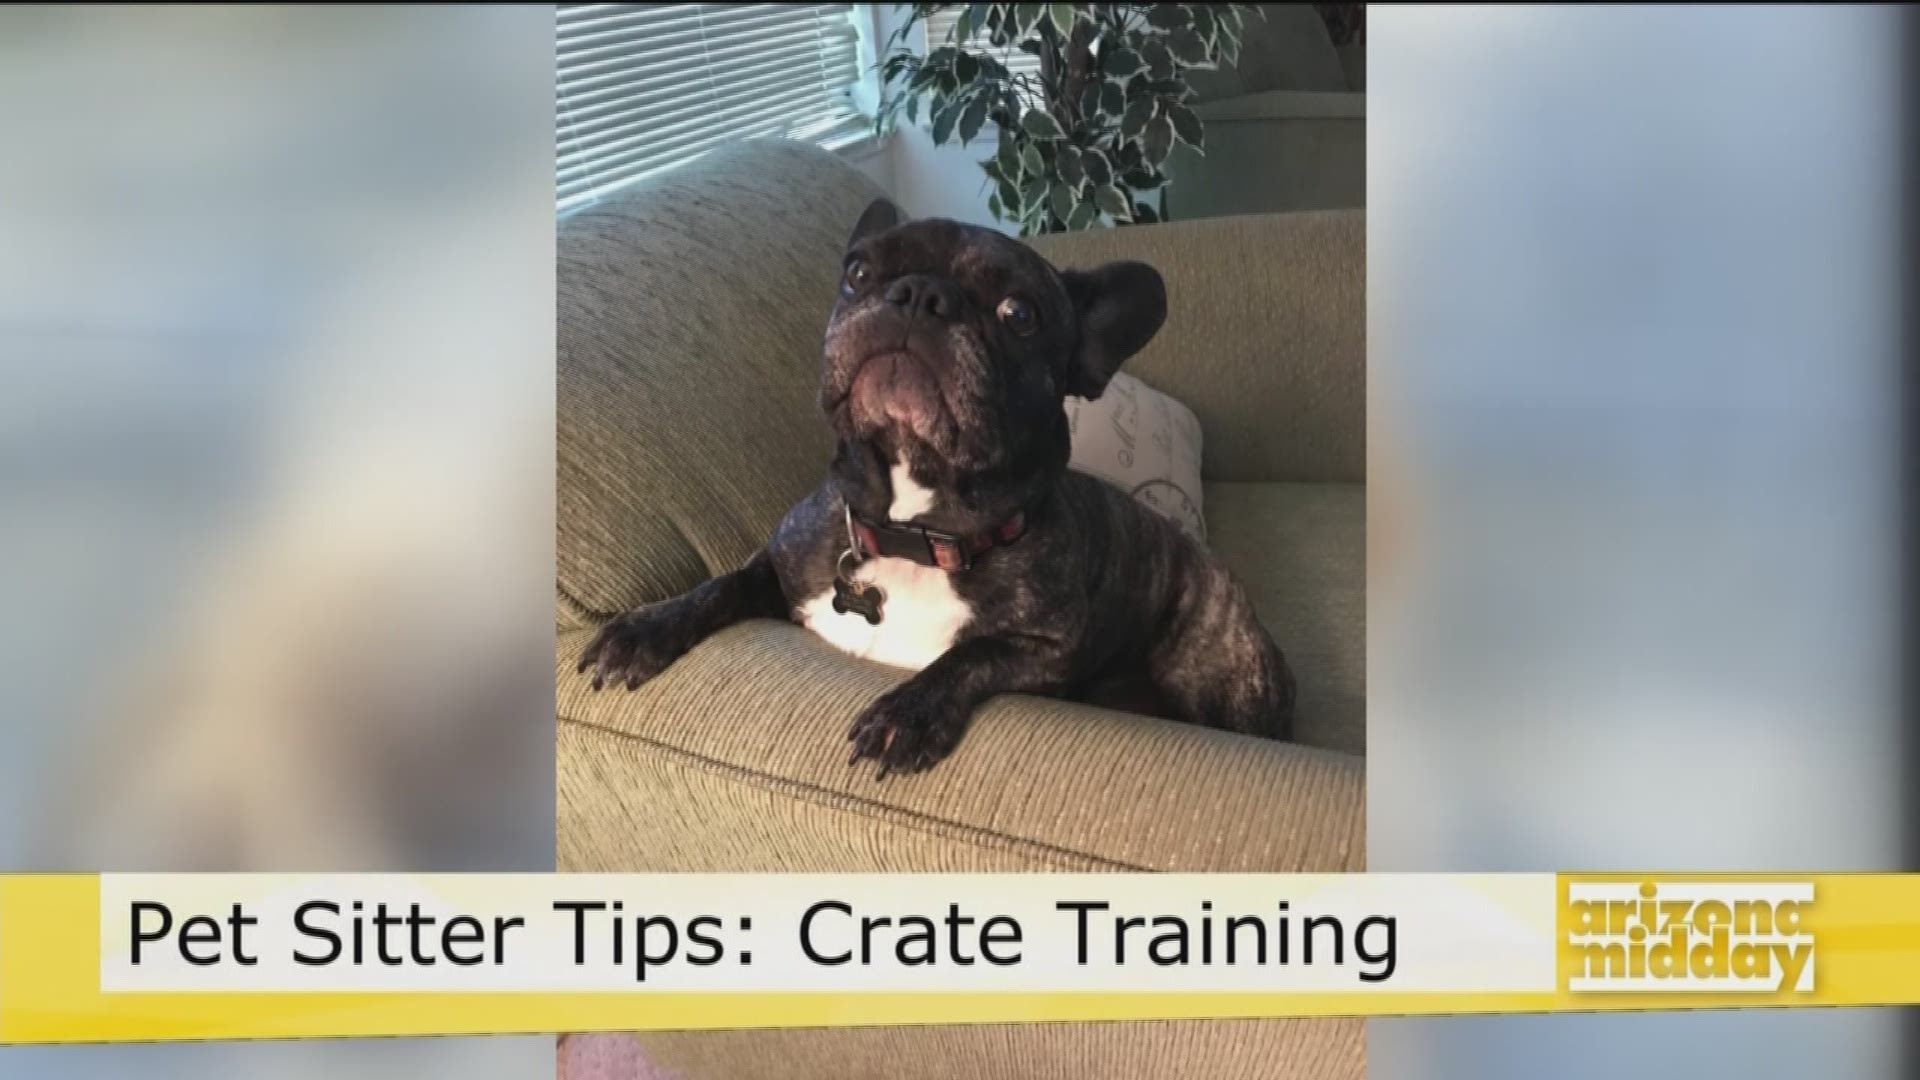 Celebrity dog trainer and author, Laura Vorreyer, talks crate training your pets and her new book "The Pet Sitter's Tale".